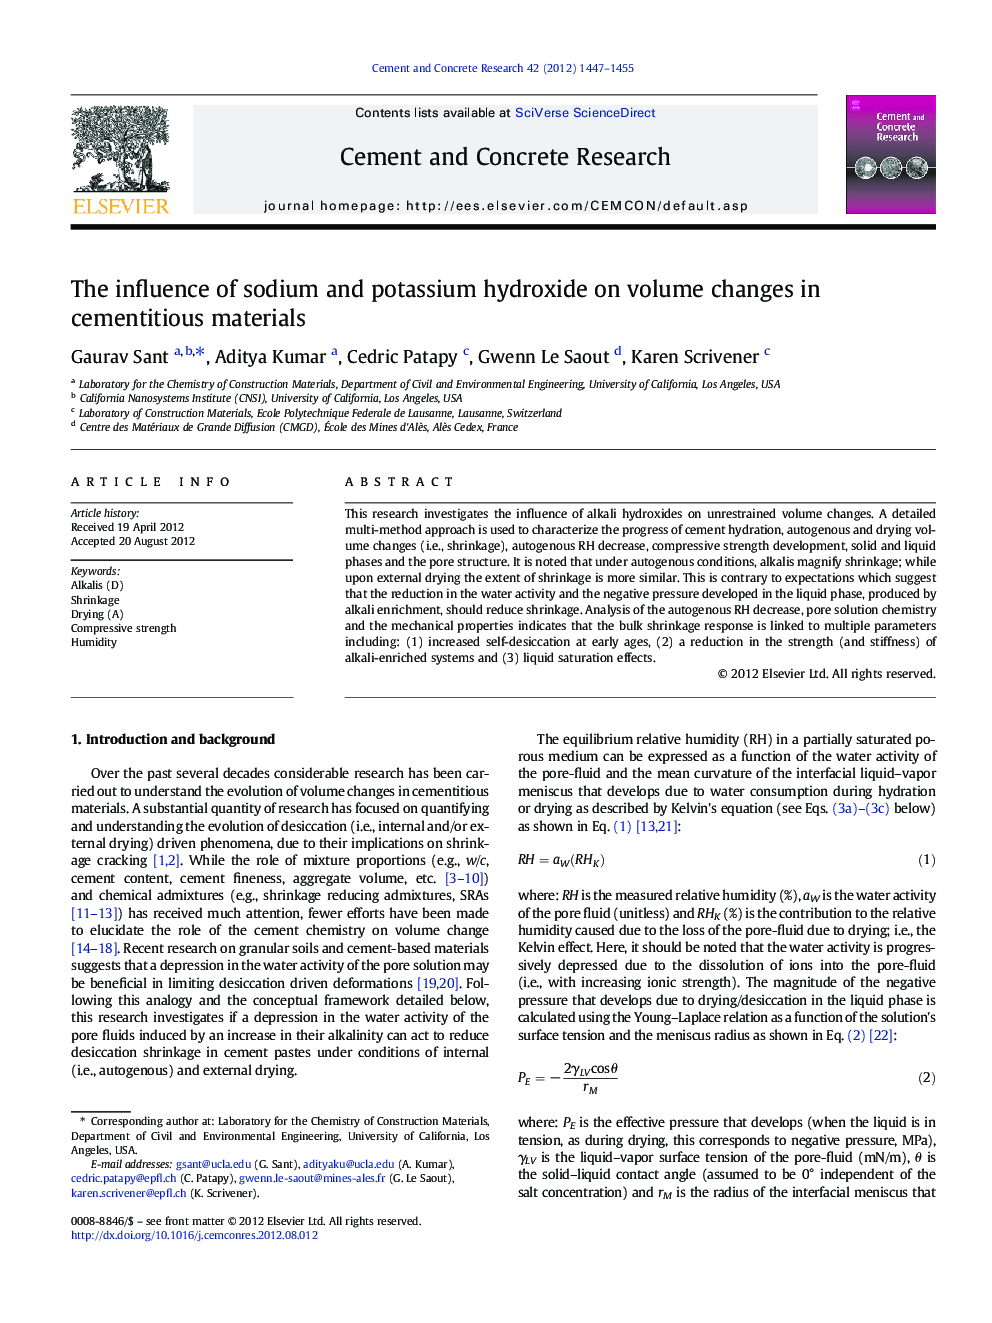 The influence of sodium and potassium hydroxide on volume changes in cementitious materials